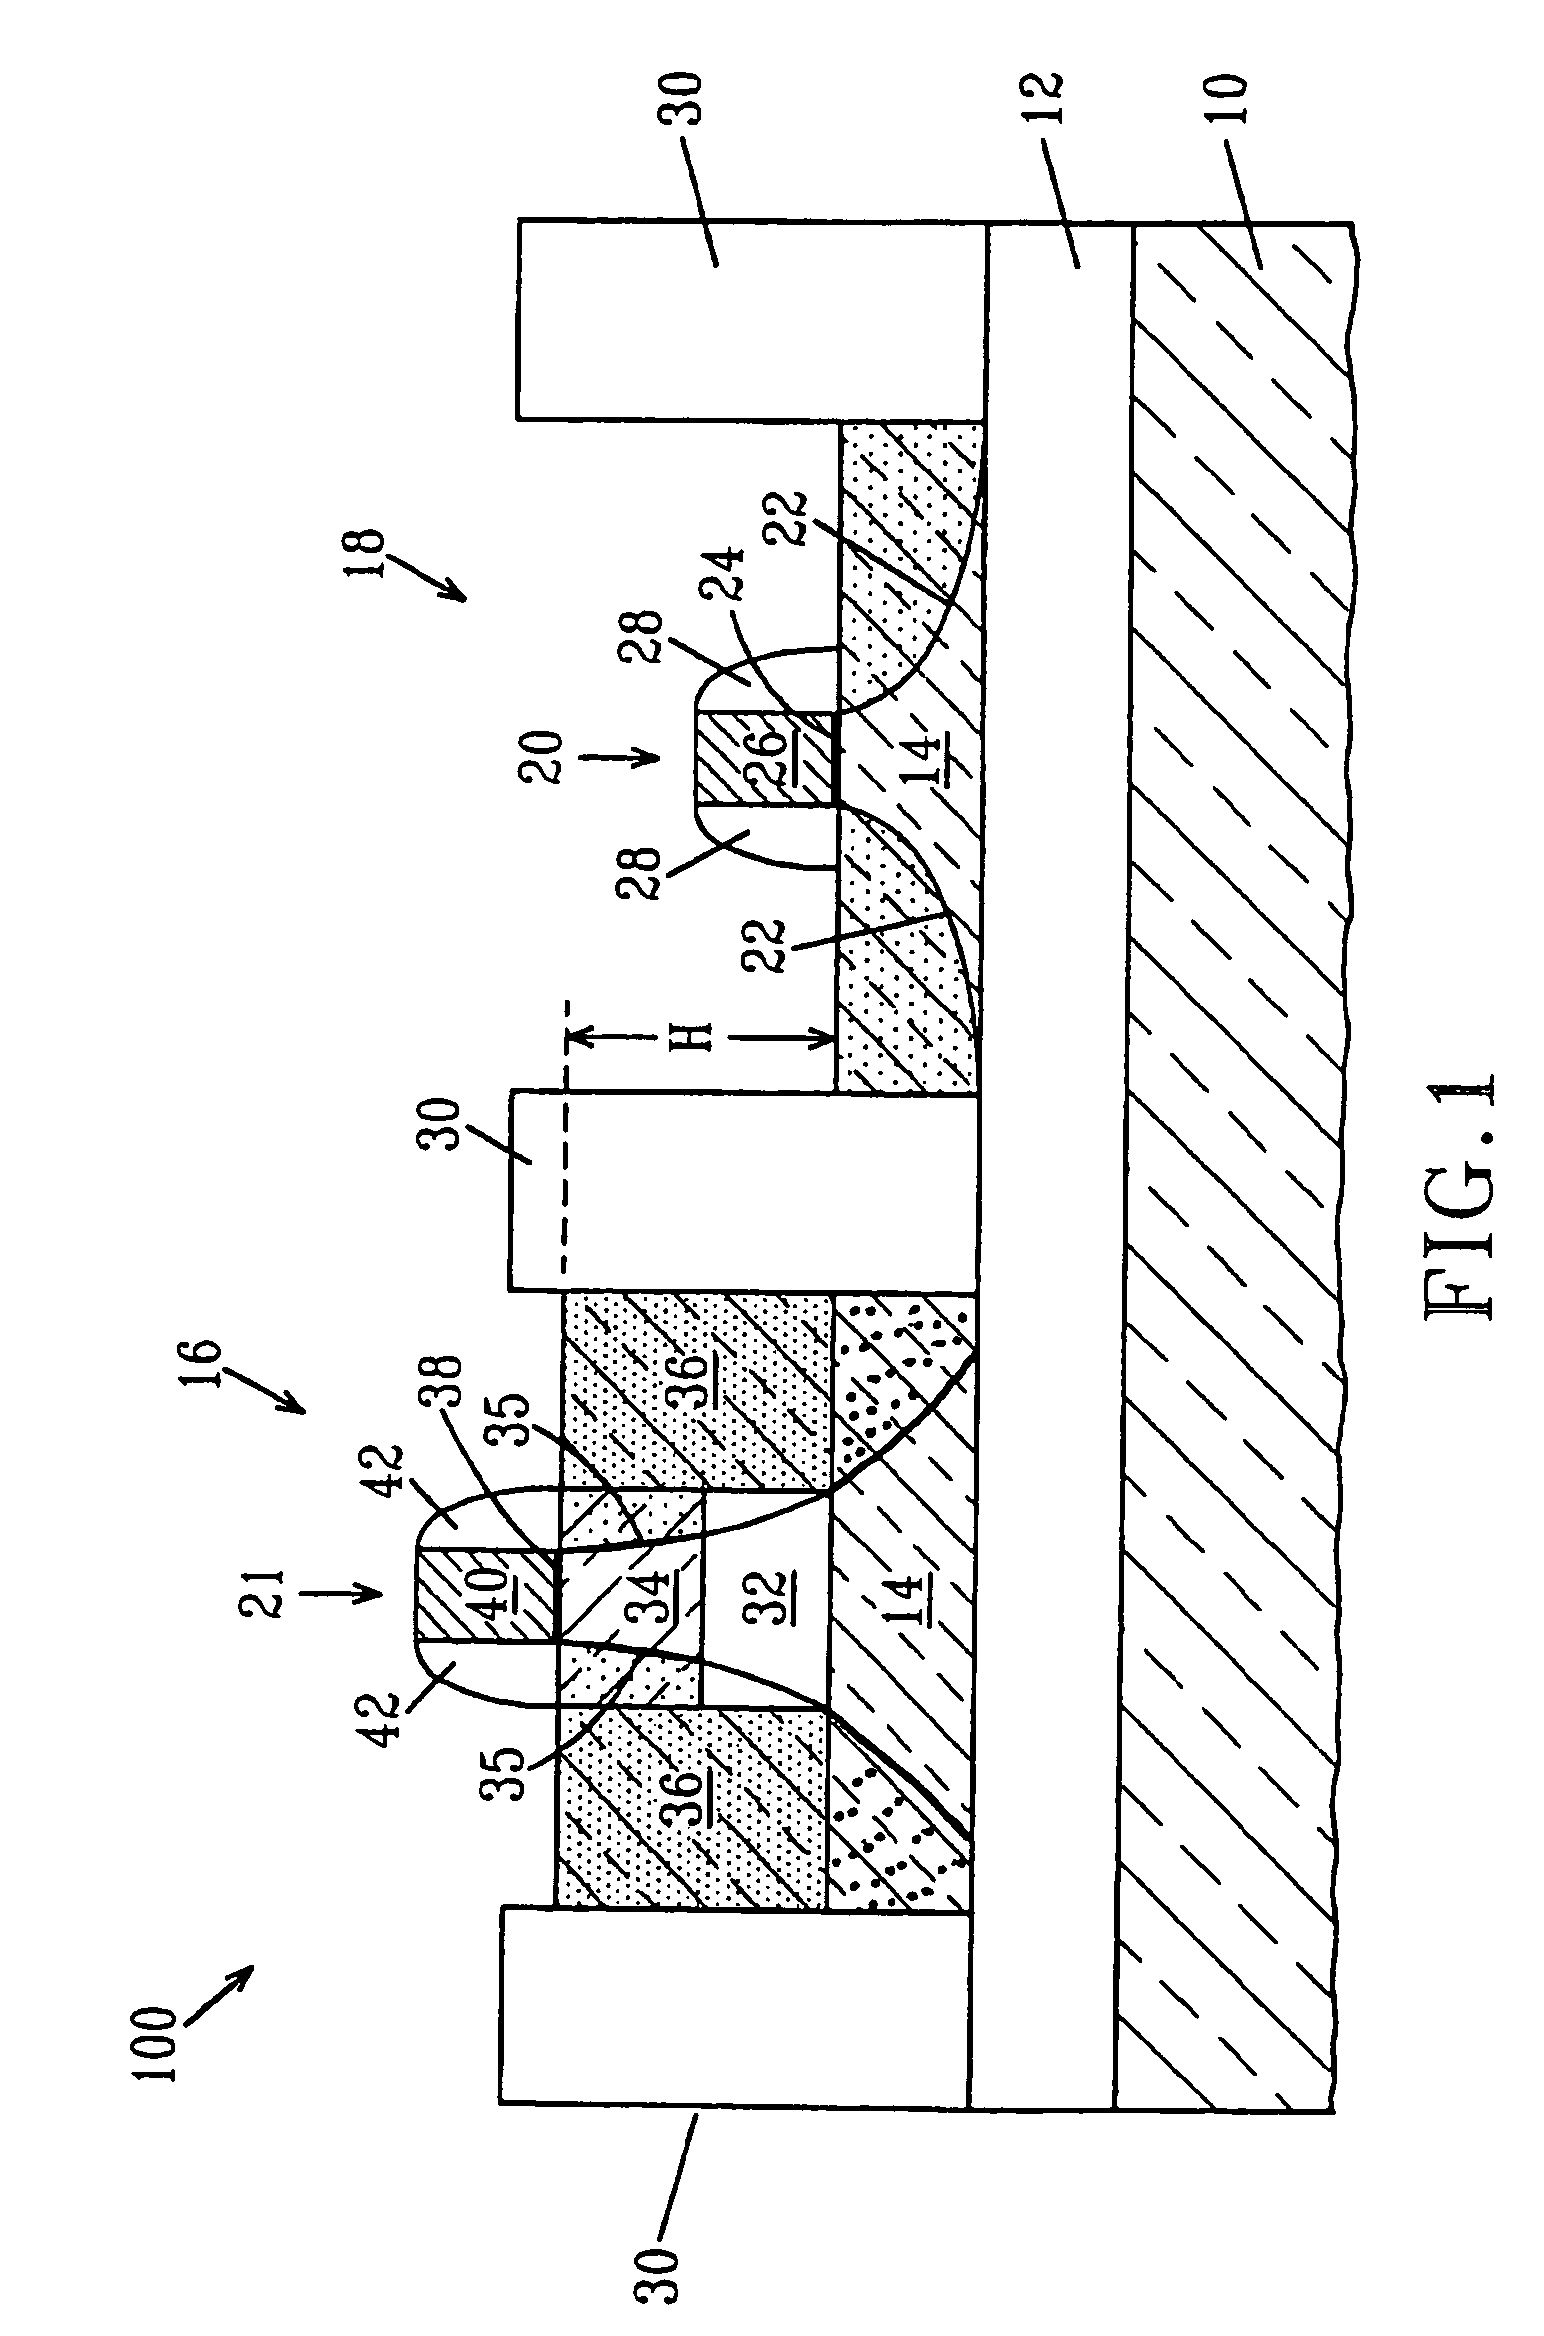 Double silicon-on-insulator (SOI) metal oxide semiconductor field effect transistor (MOSFET) structures